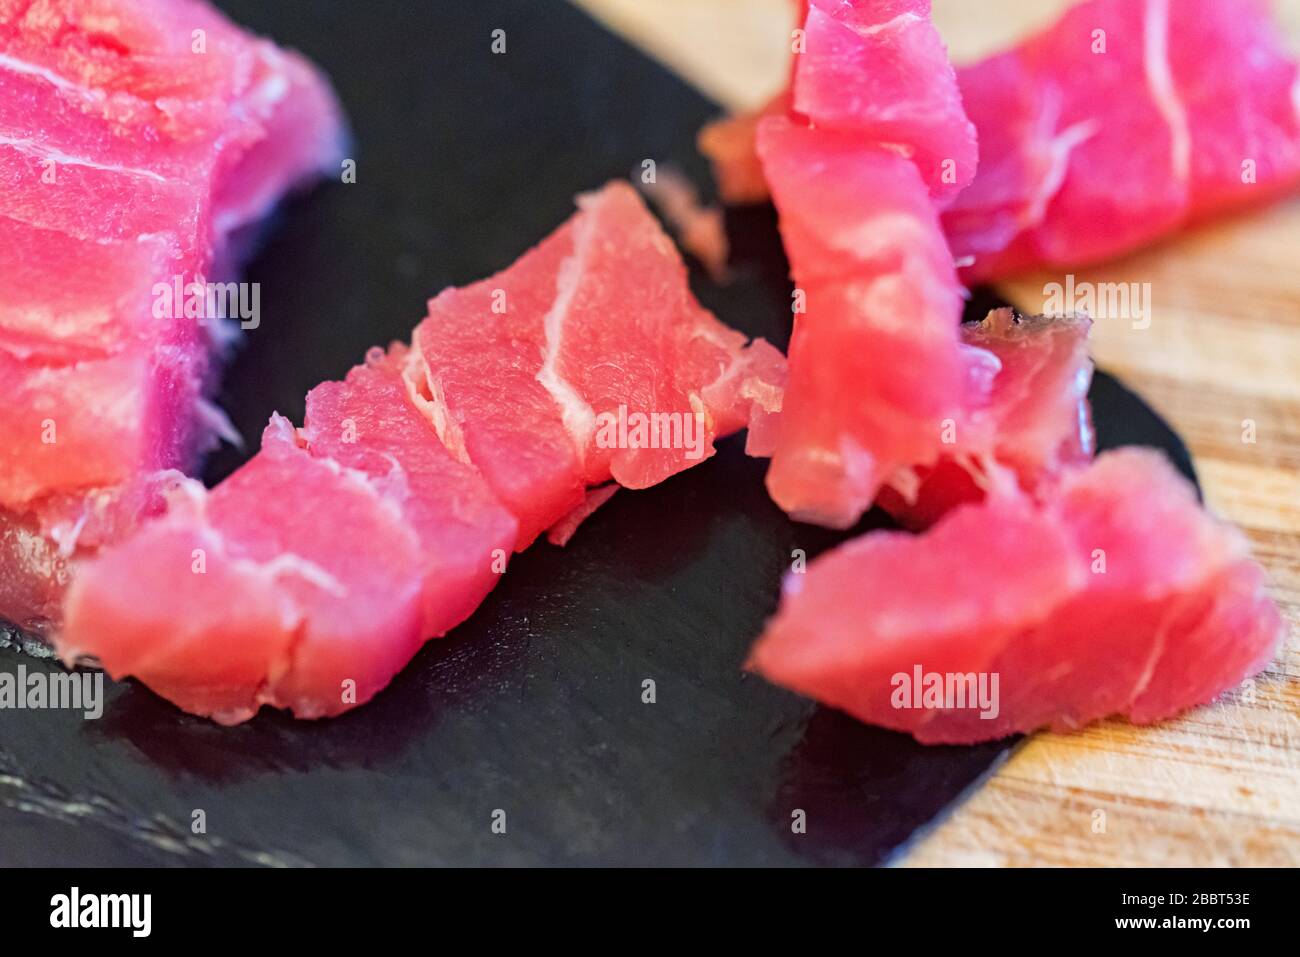 Close-up image of pieces of smoked prepared tuna fillet Stock Photo